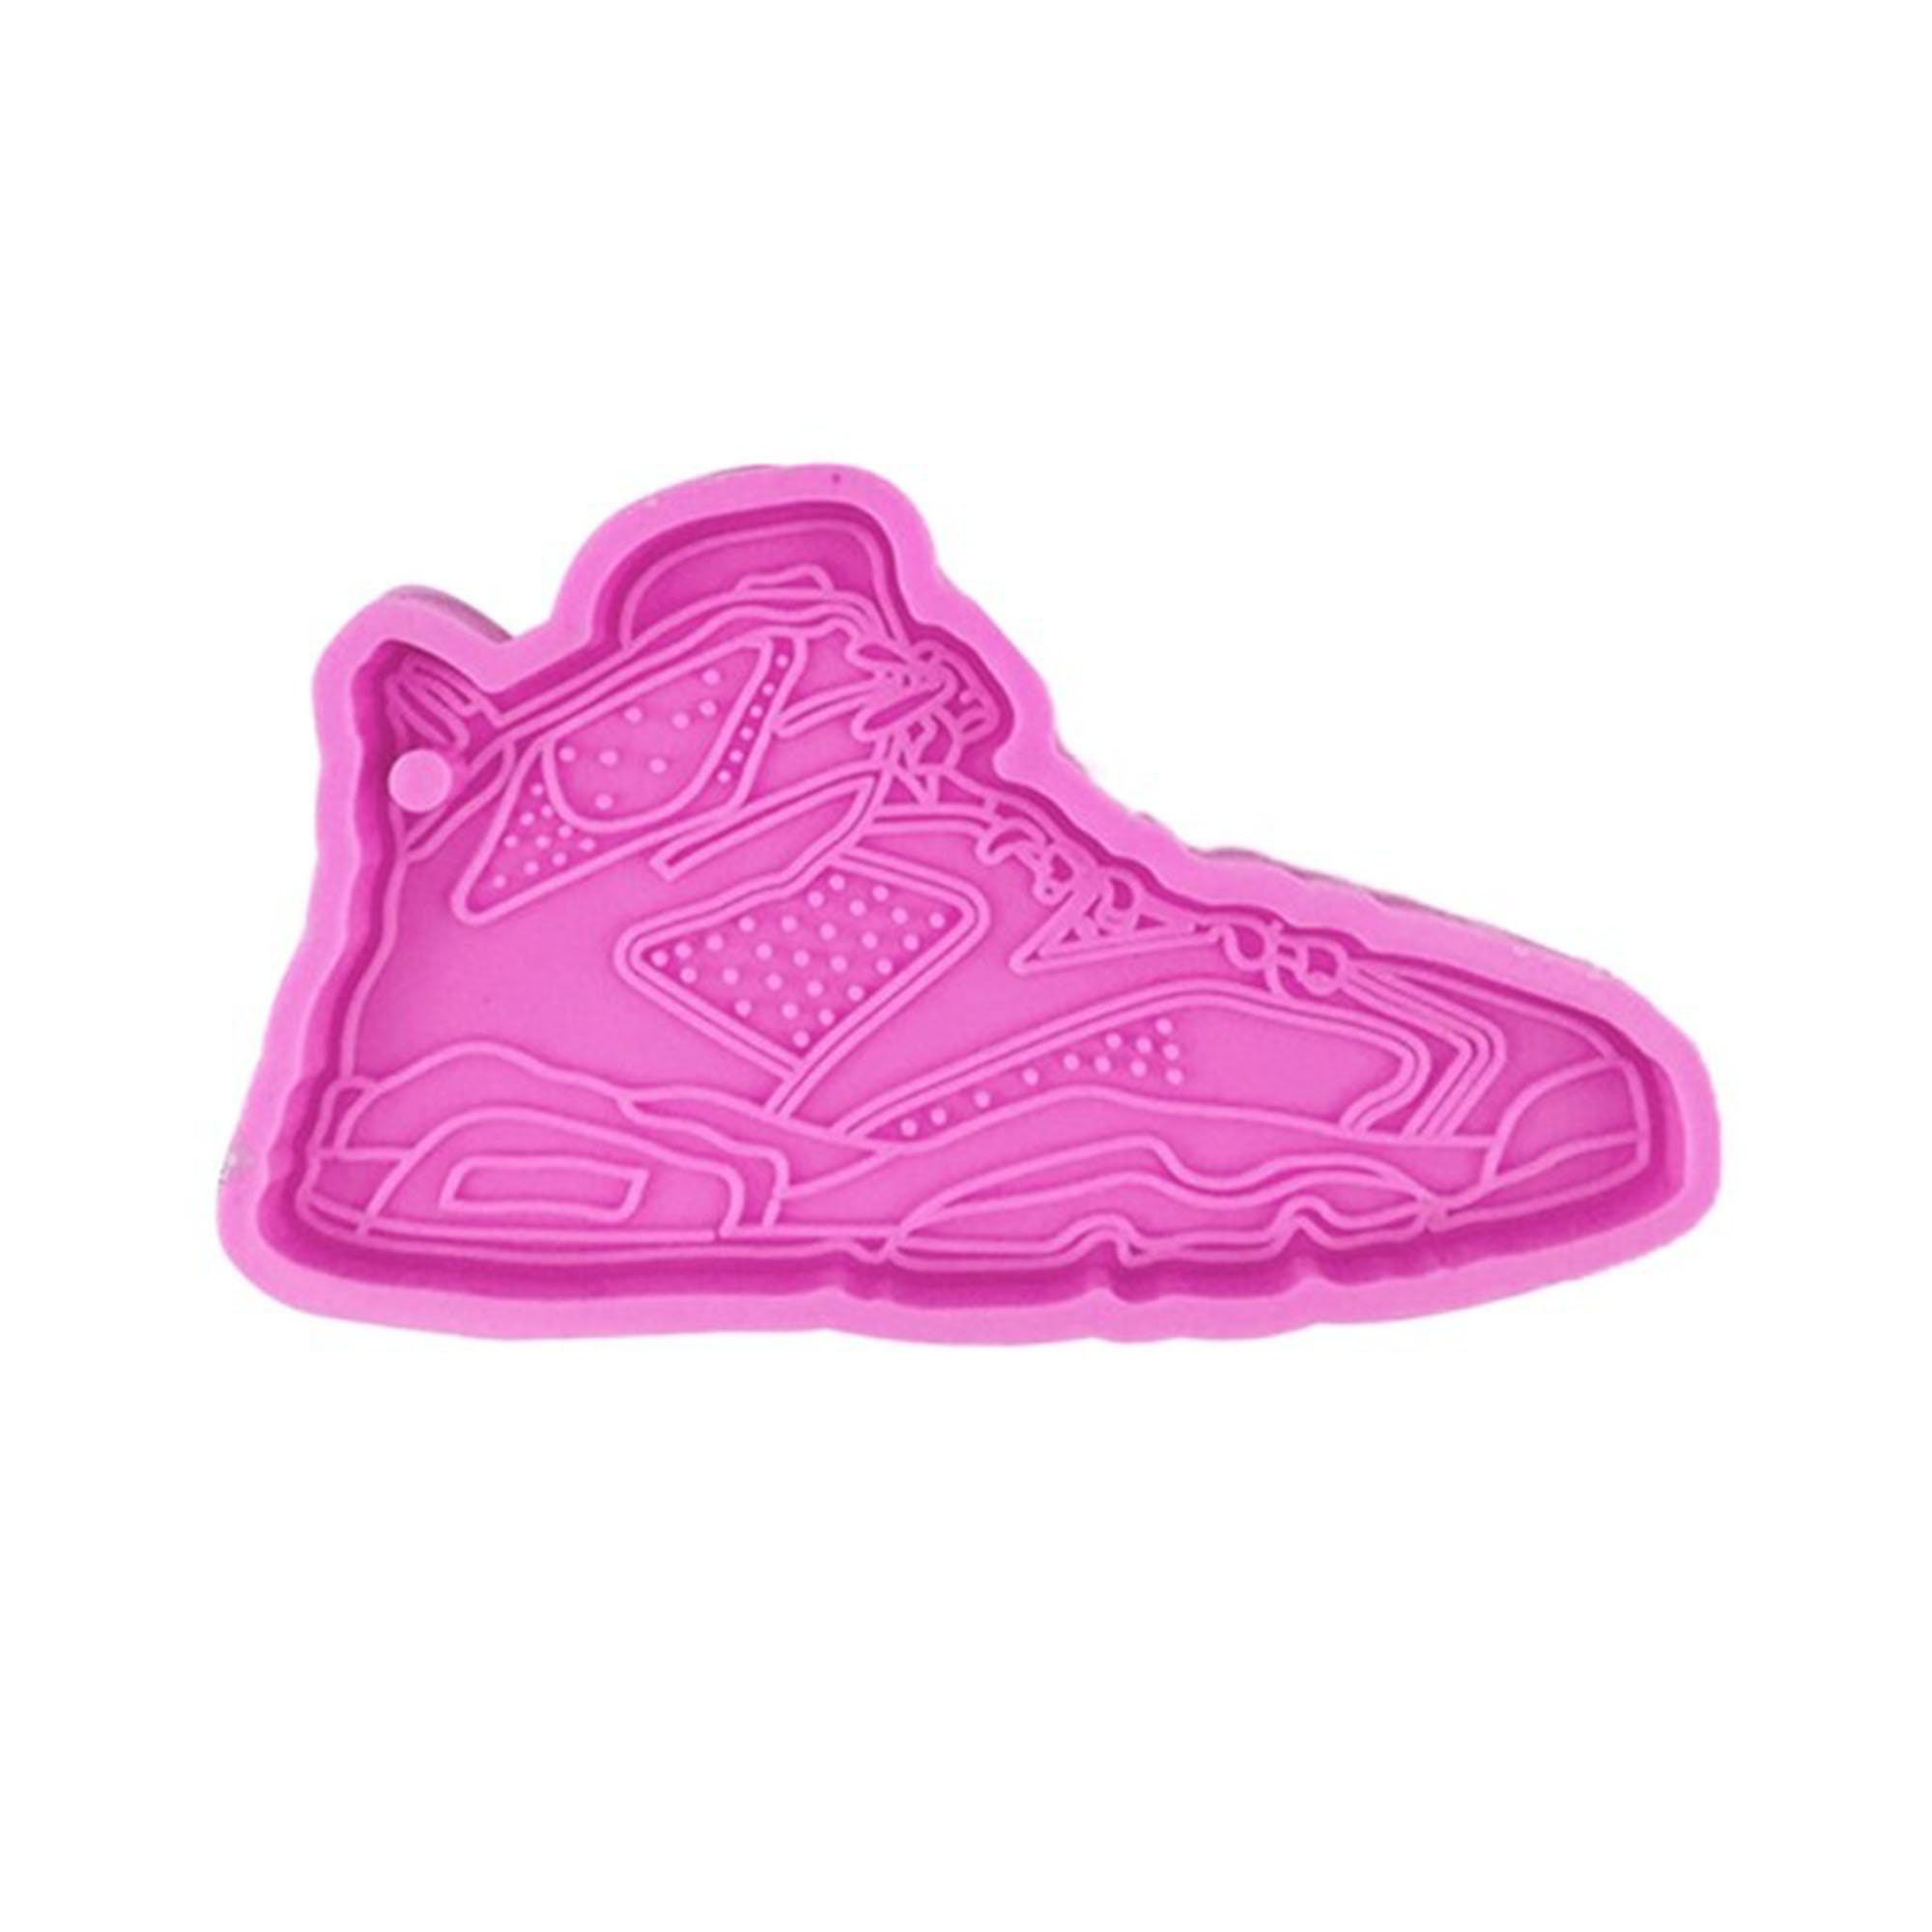 3D Shoes Resin Mold-sneakers Silicone Mold-crystal Epoxy Shoes